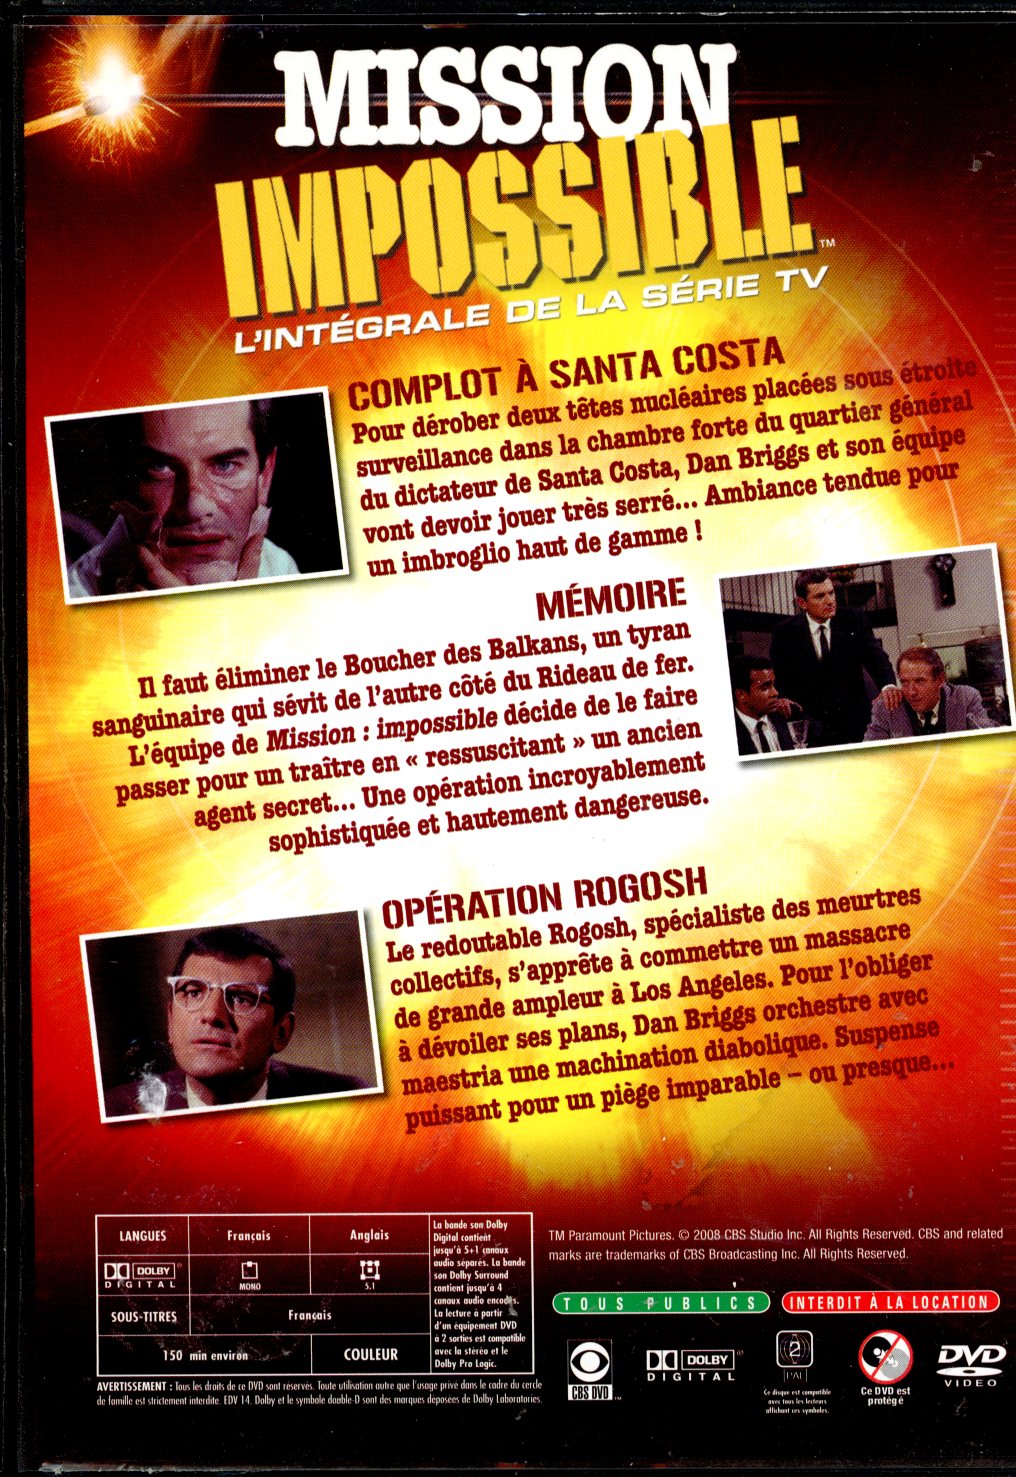 MISSION IMPOSSIBLE N°1 DVD OCCASION